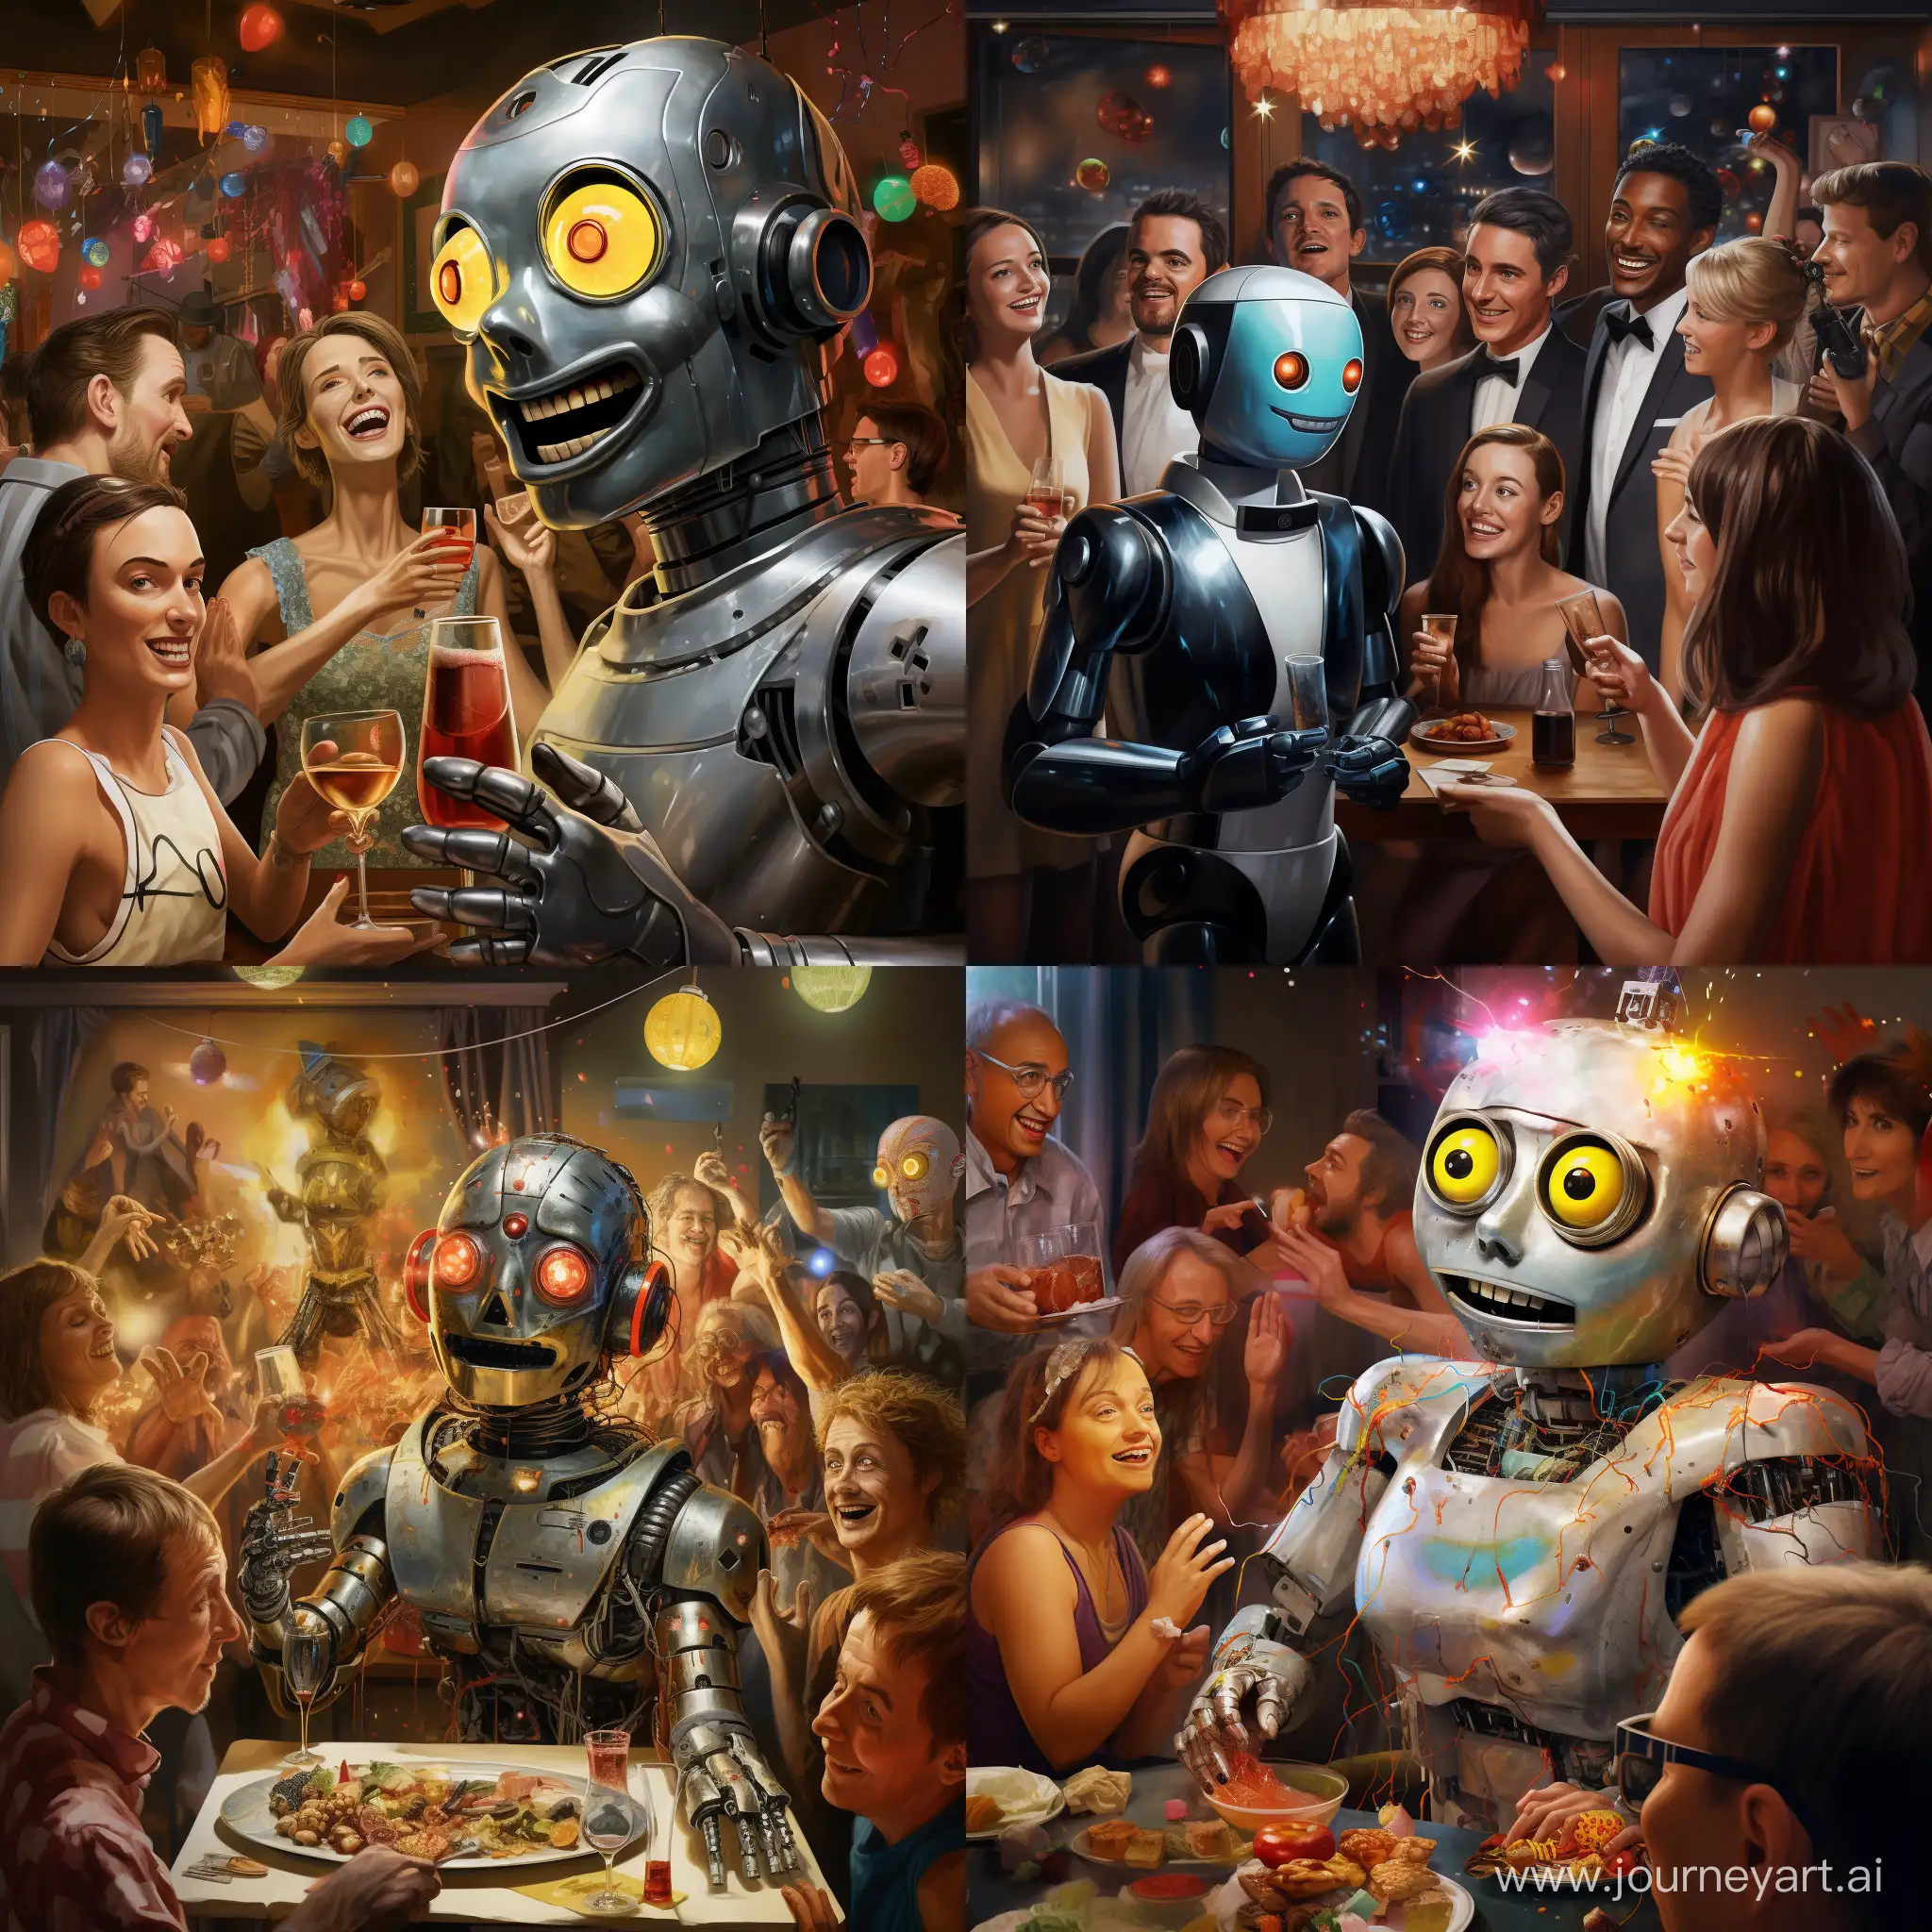 The year is 2042. Robots have become an integral part of human society. This robot is having fun with people at a party. The robot's eyes appear to examine the world that surrounds it. The robot has an expression of confidence on its face that the future is bright